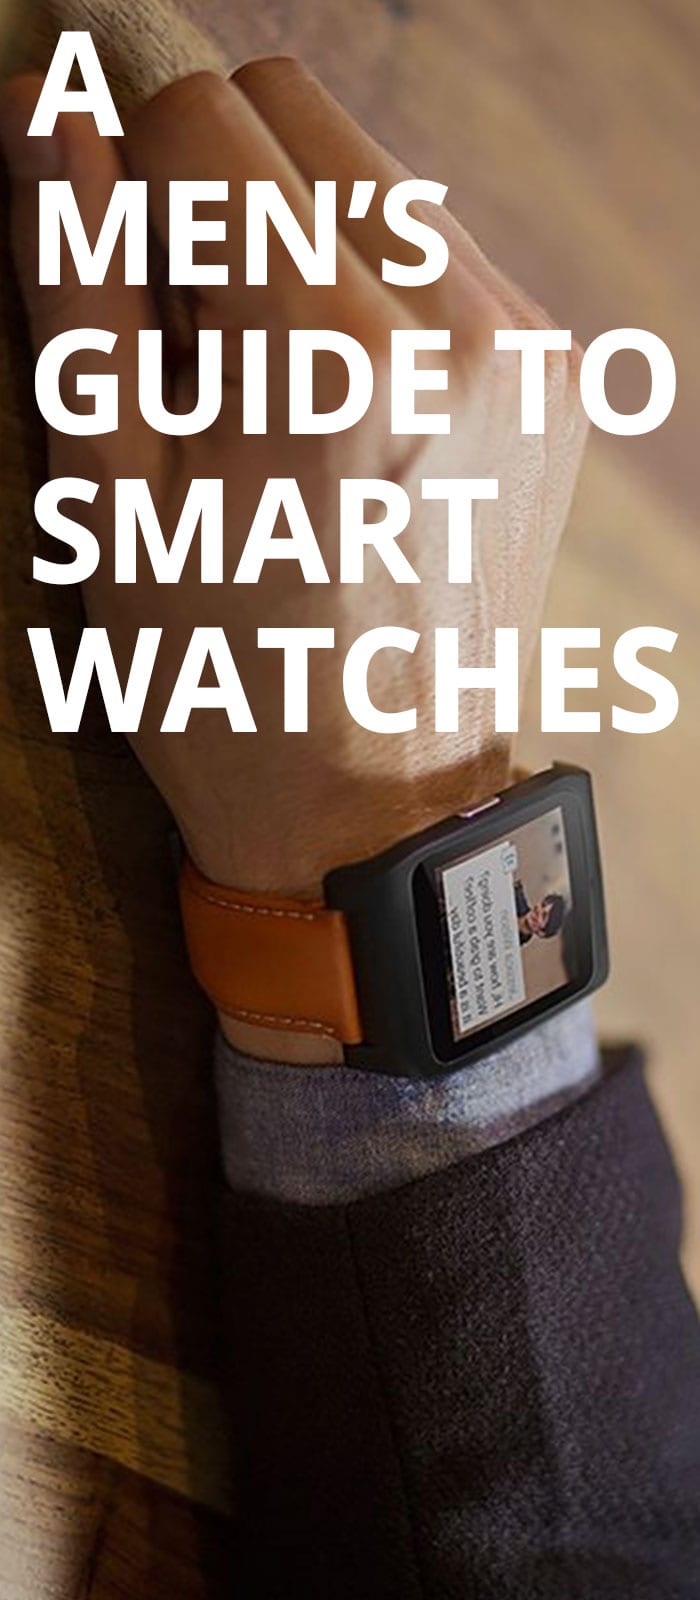 A Men’s Guide To Smart Watches